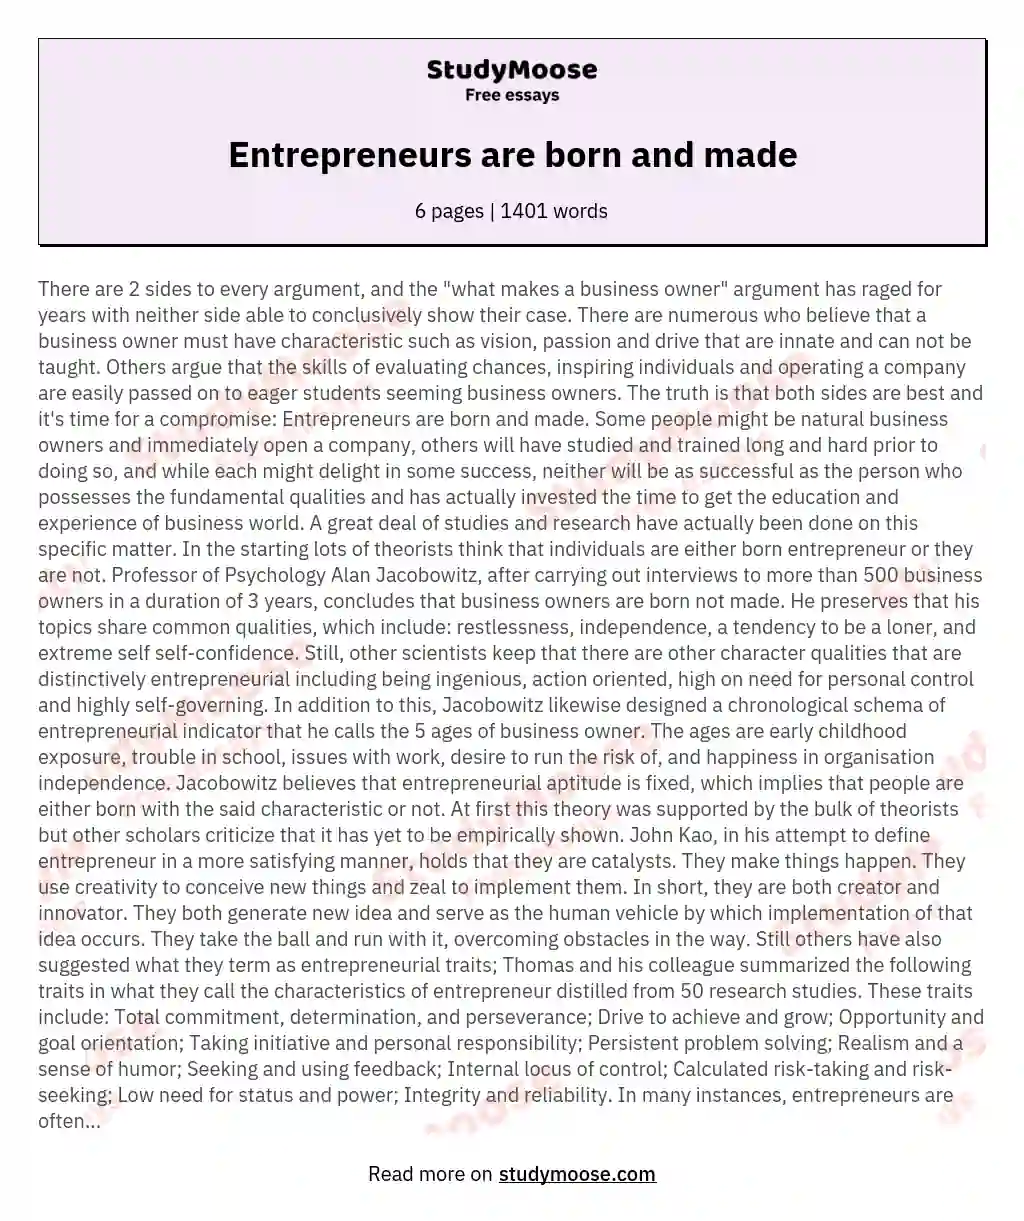 Entrepreneurs are born and made essay